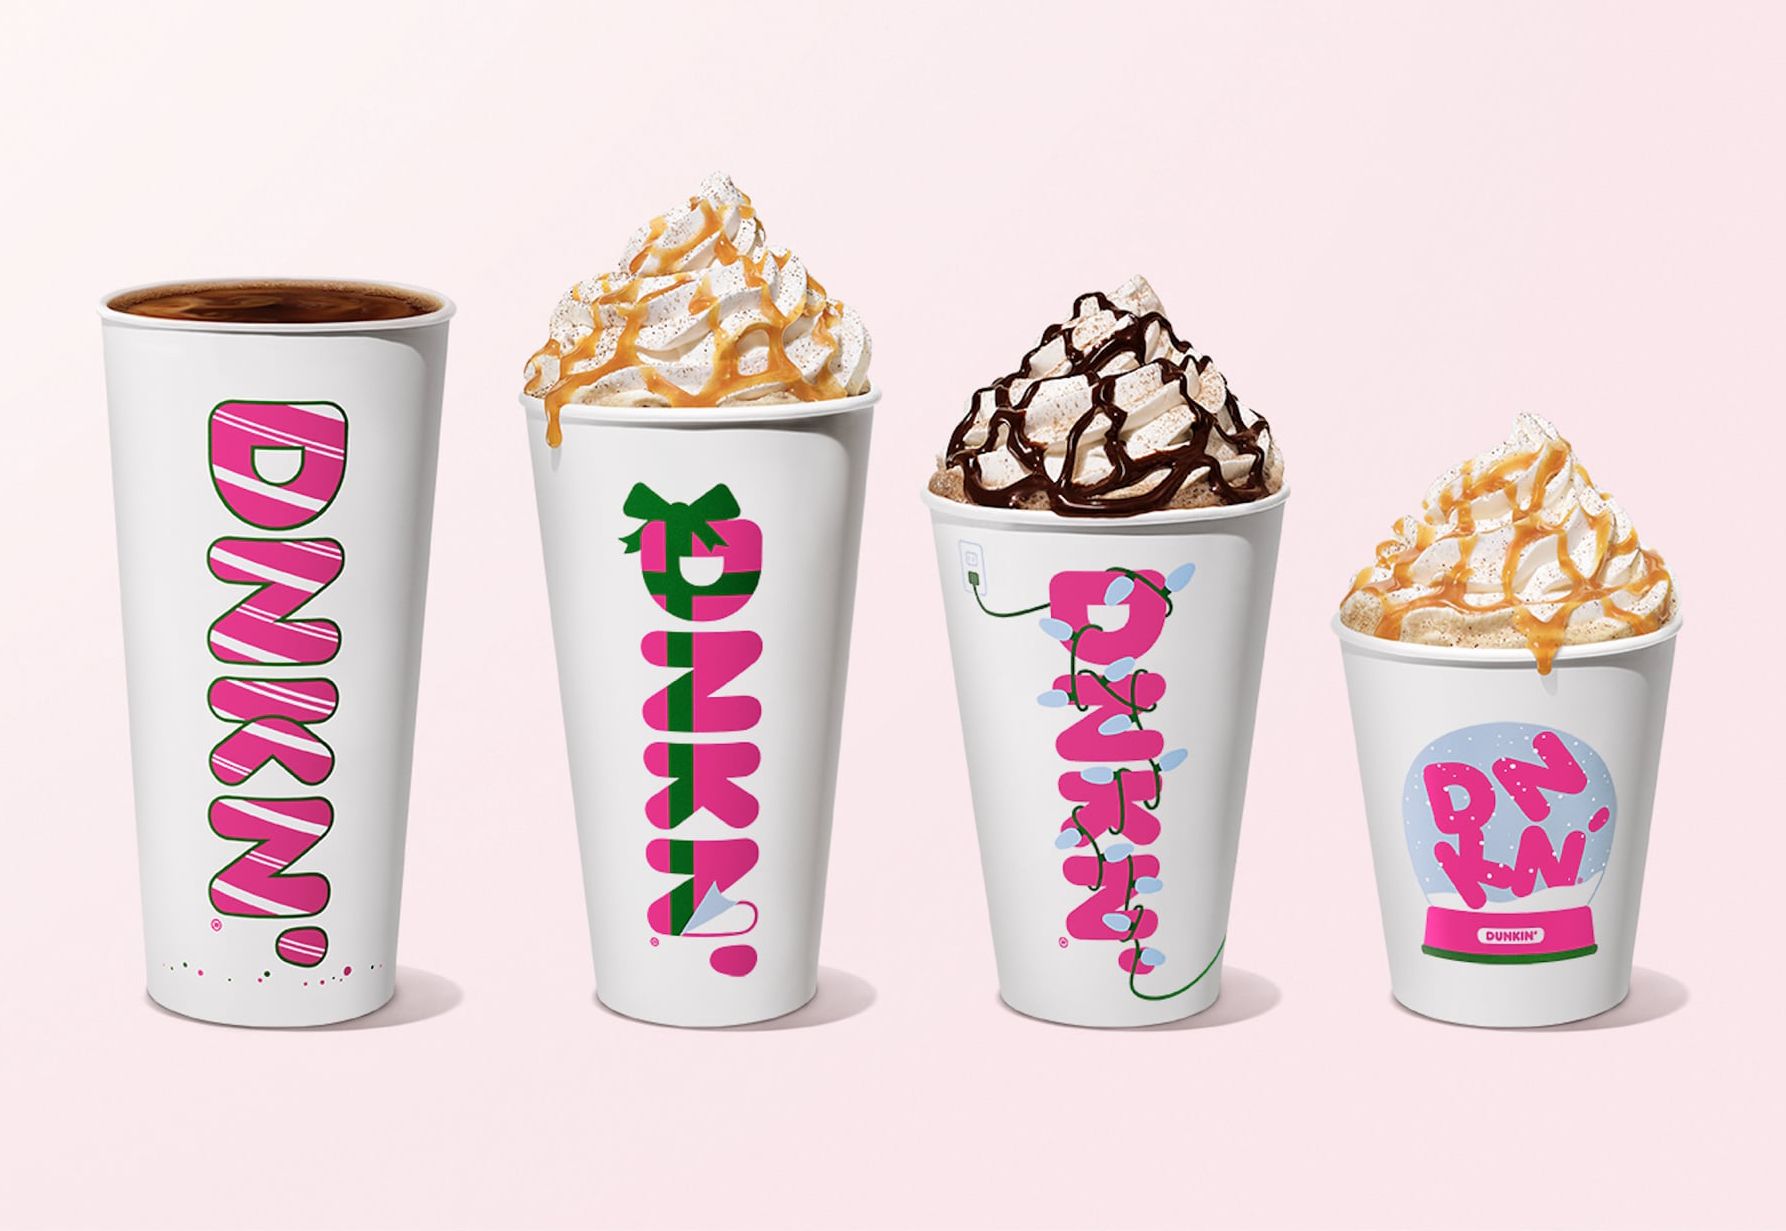 Dunkin’ Donuts Heralds their New Holiday Drink Menu Including the White Mocha Hot Chocolate and Peppermint Mocha Latte 